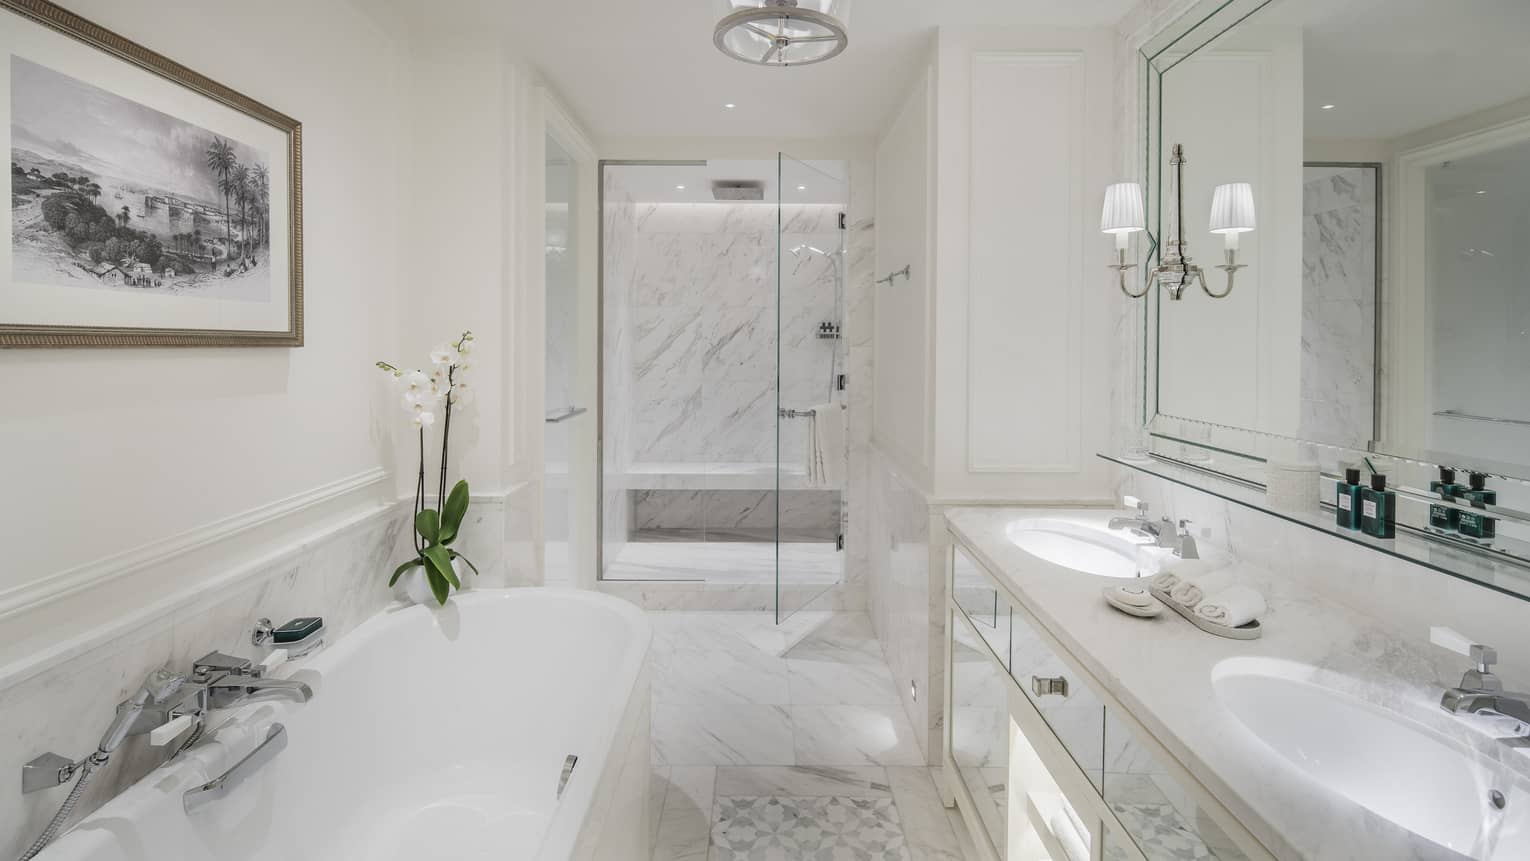 A marble bathroom with a large tub separate from a glass-walled shower.